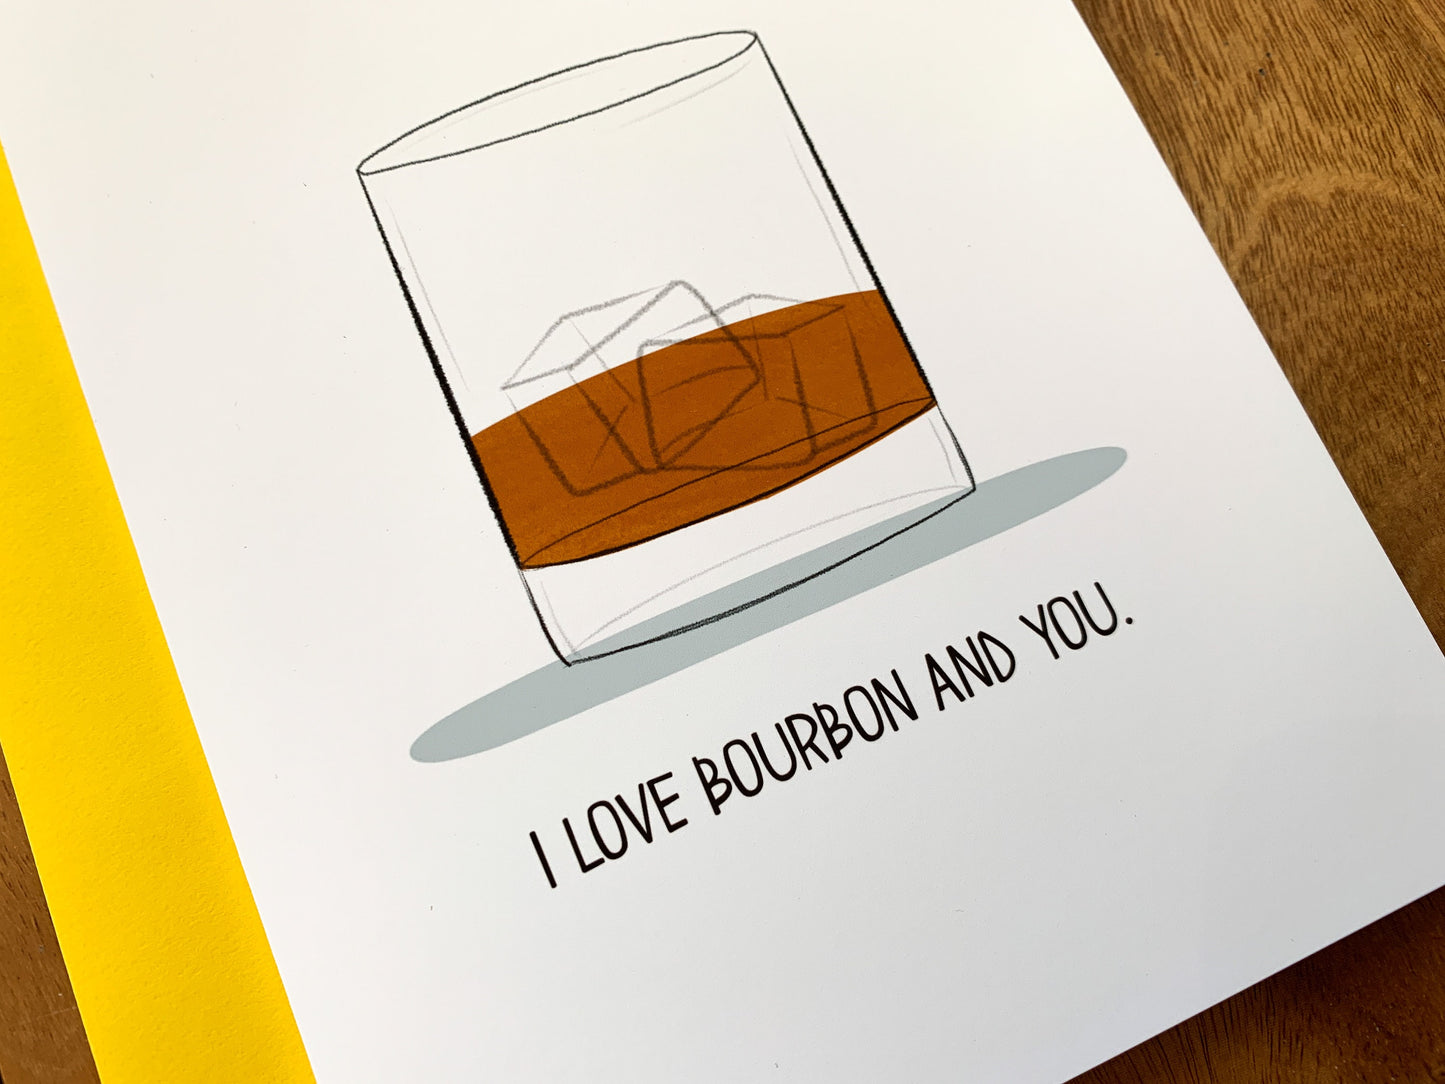 I Love Bourbon and You Card by StoneDonut Design